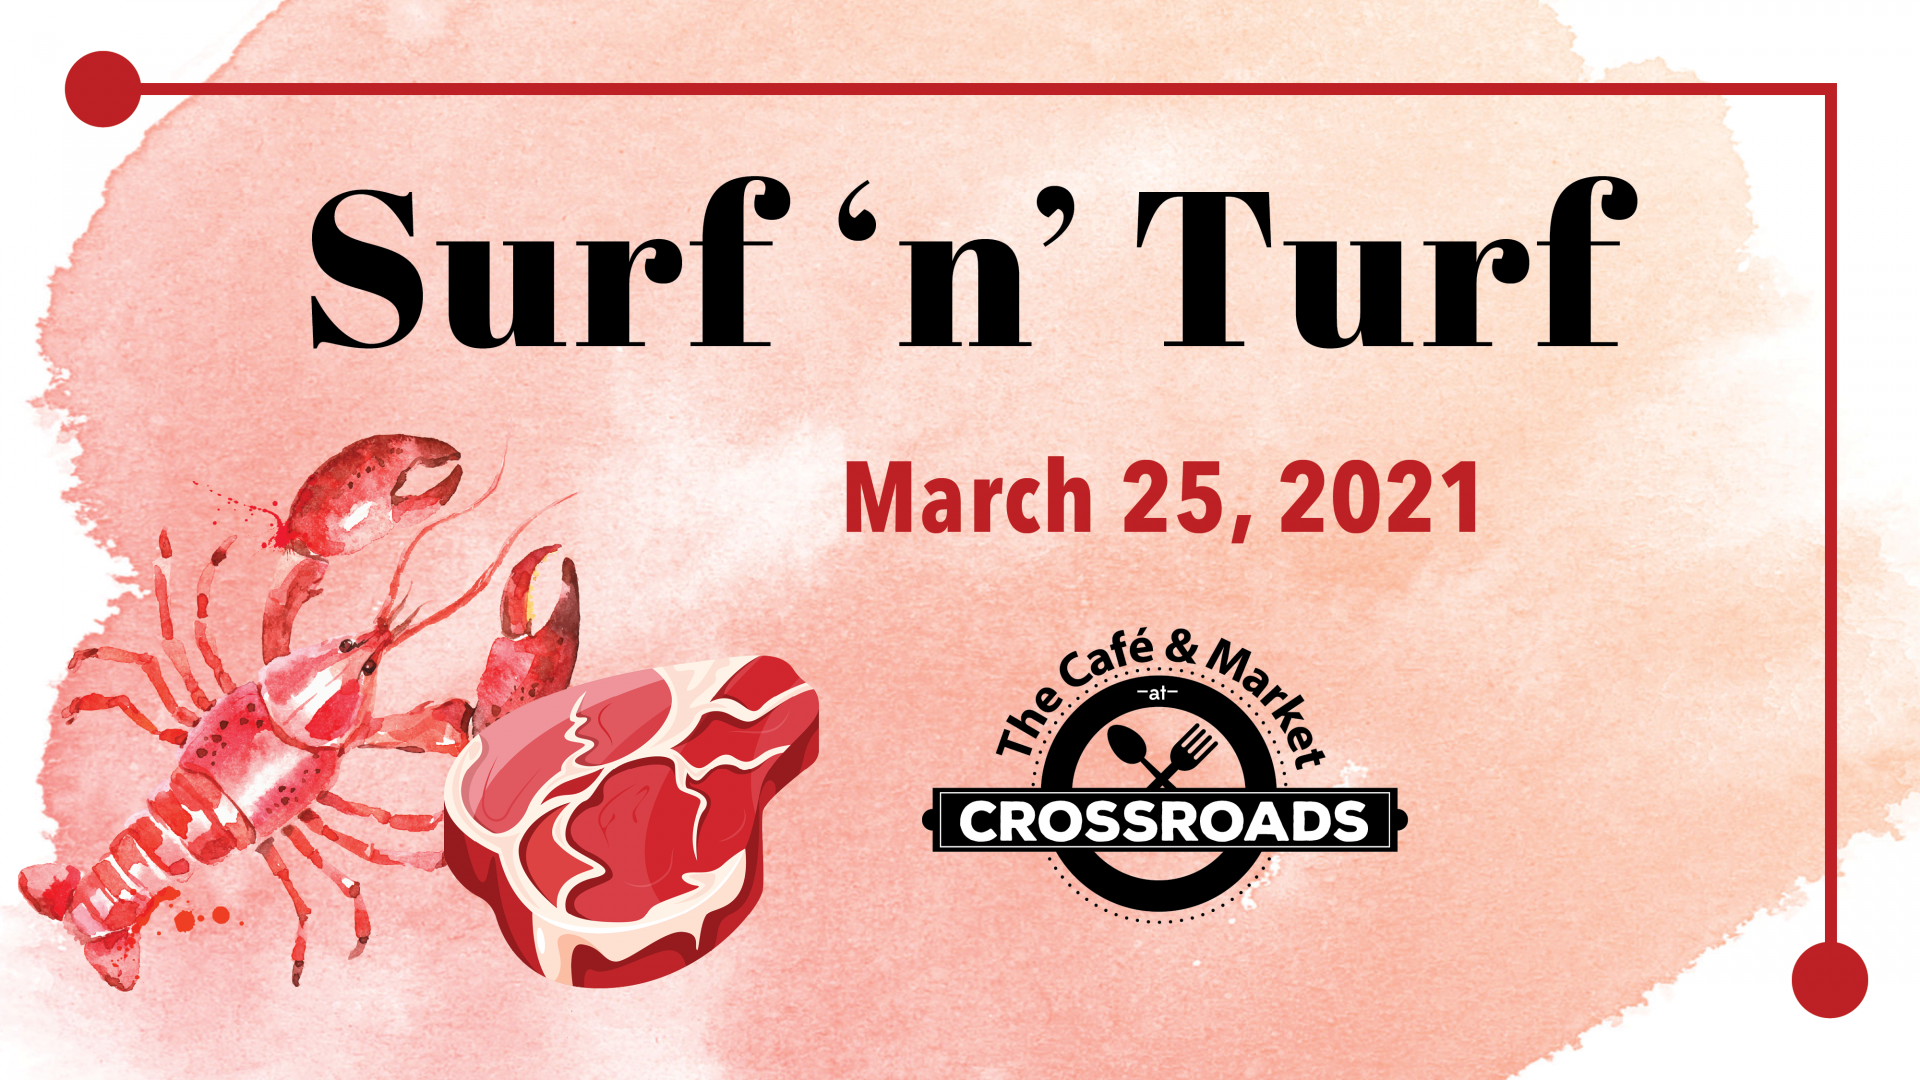 A pink background with an red lobster with prime rib, the Cafe & Market at Crossroads logo beside it. "Surf n' Turf" on "March 25, 2021"